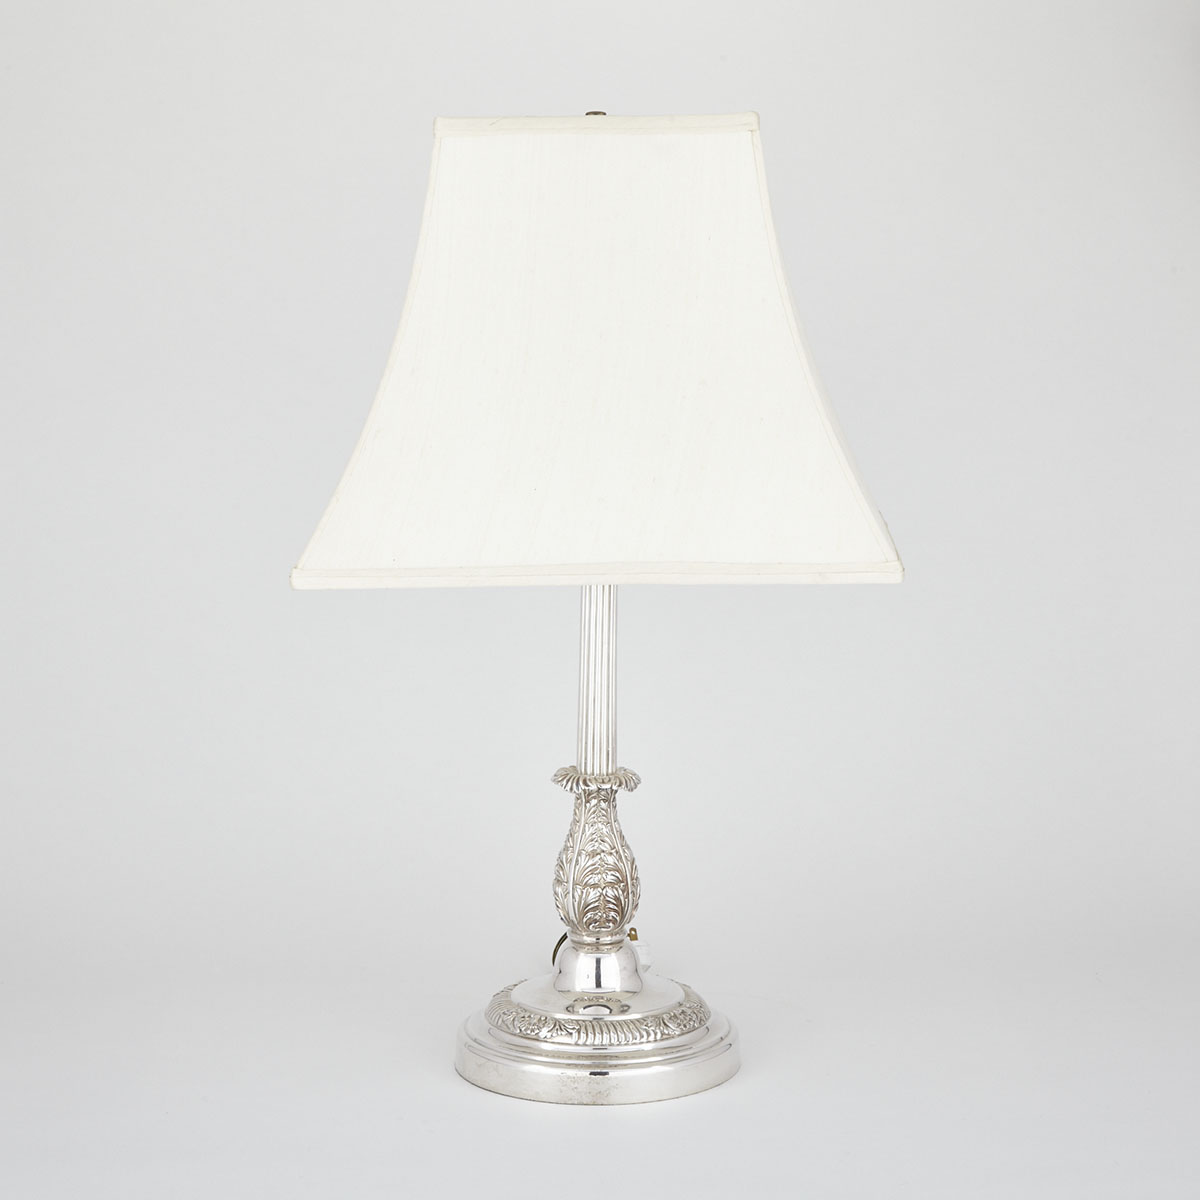 Victorian Silver Plated Table Lamp, Hinks & Son, late 19th century